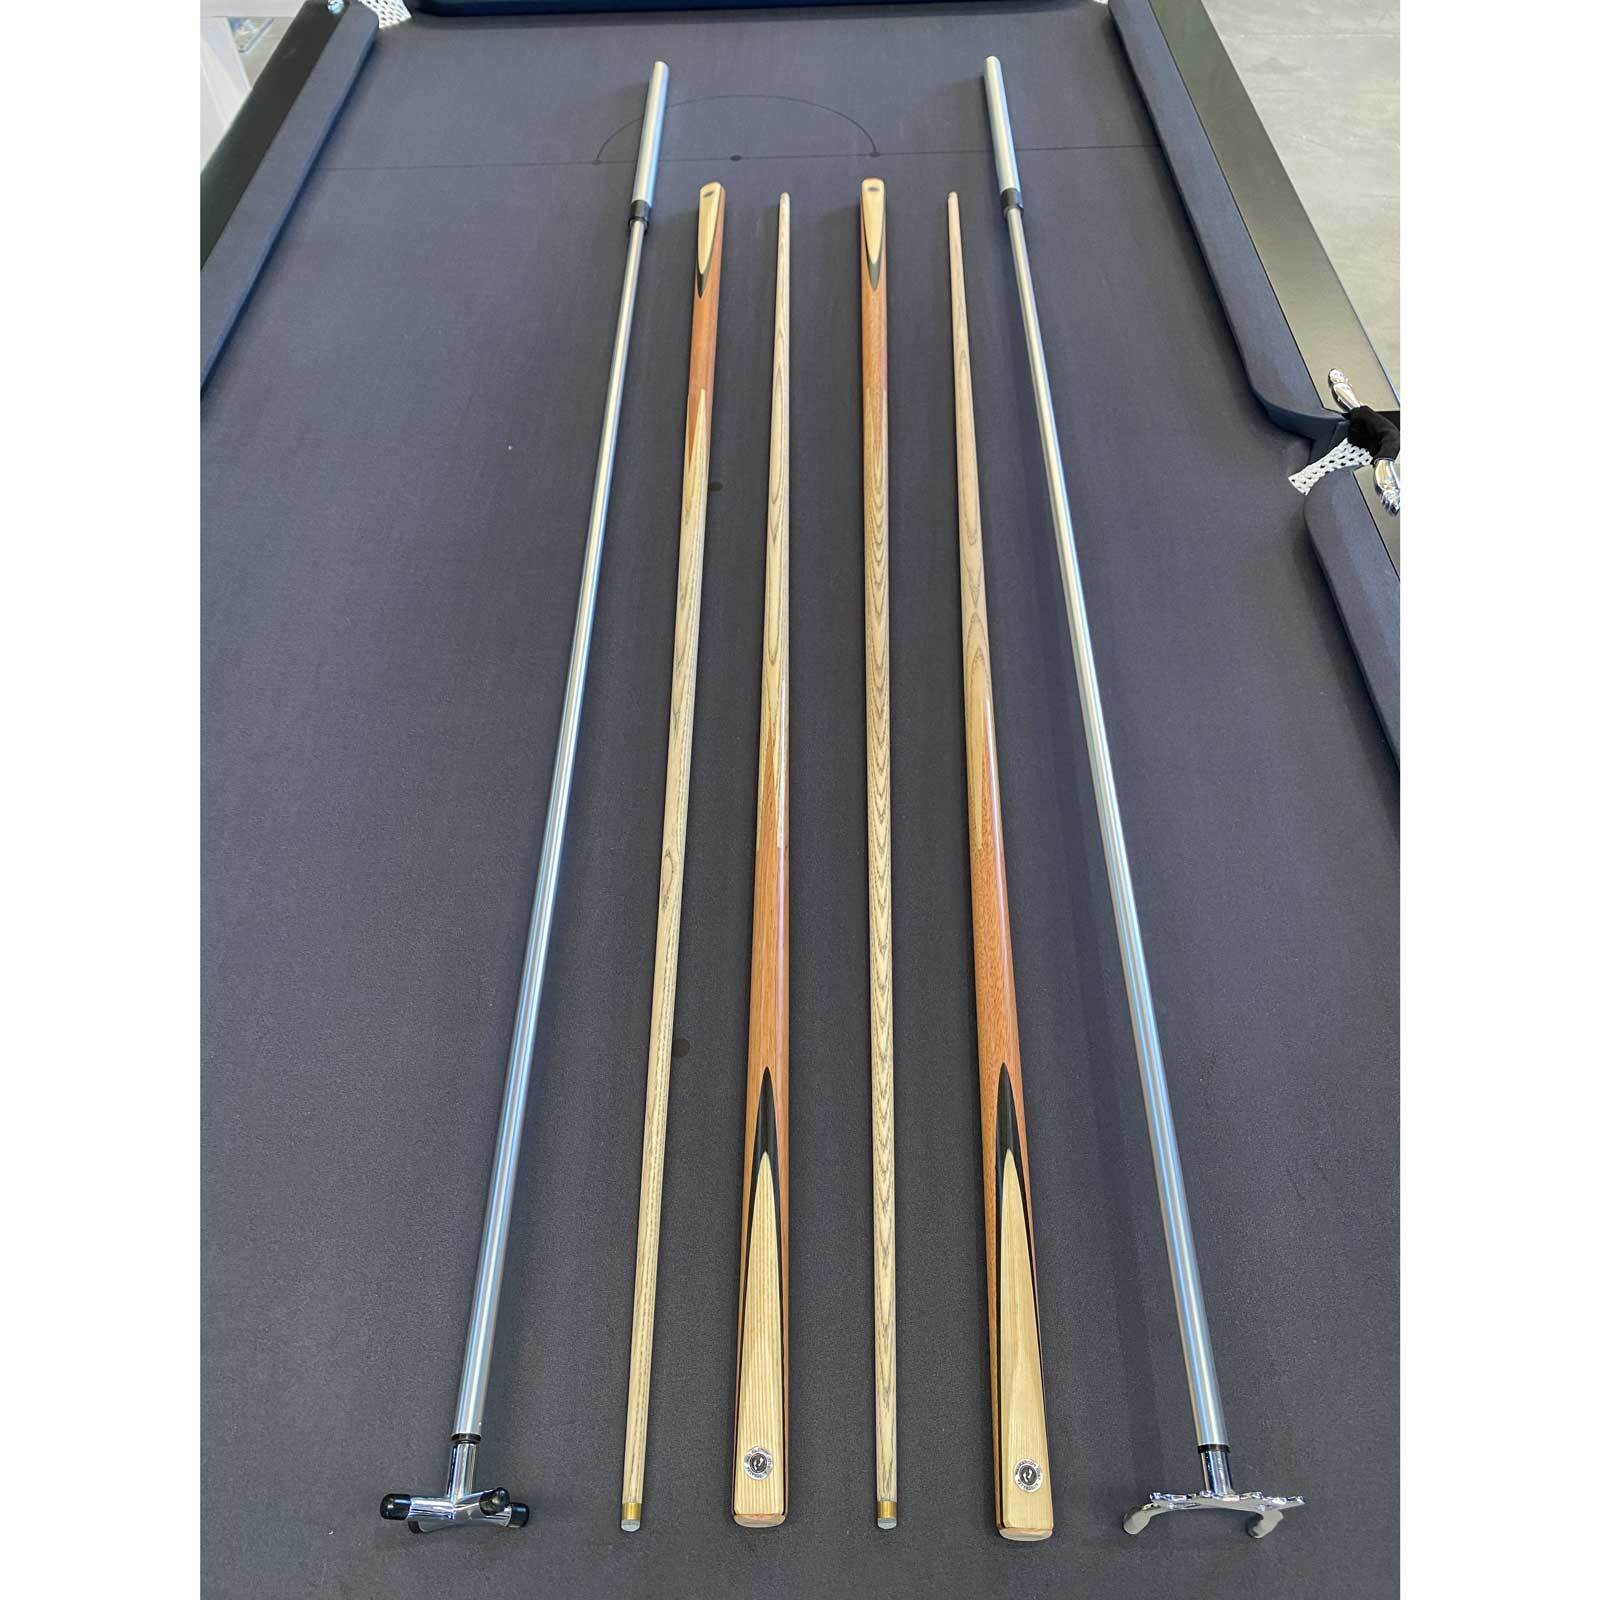 Pool cue and cross rest value pack